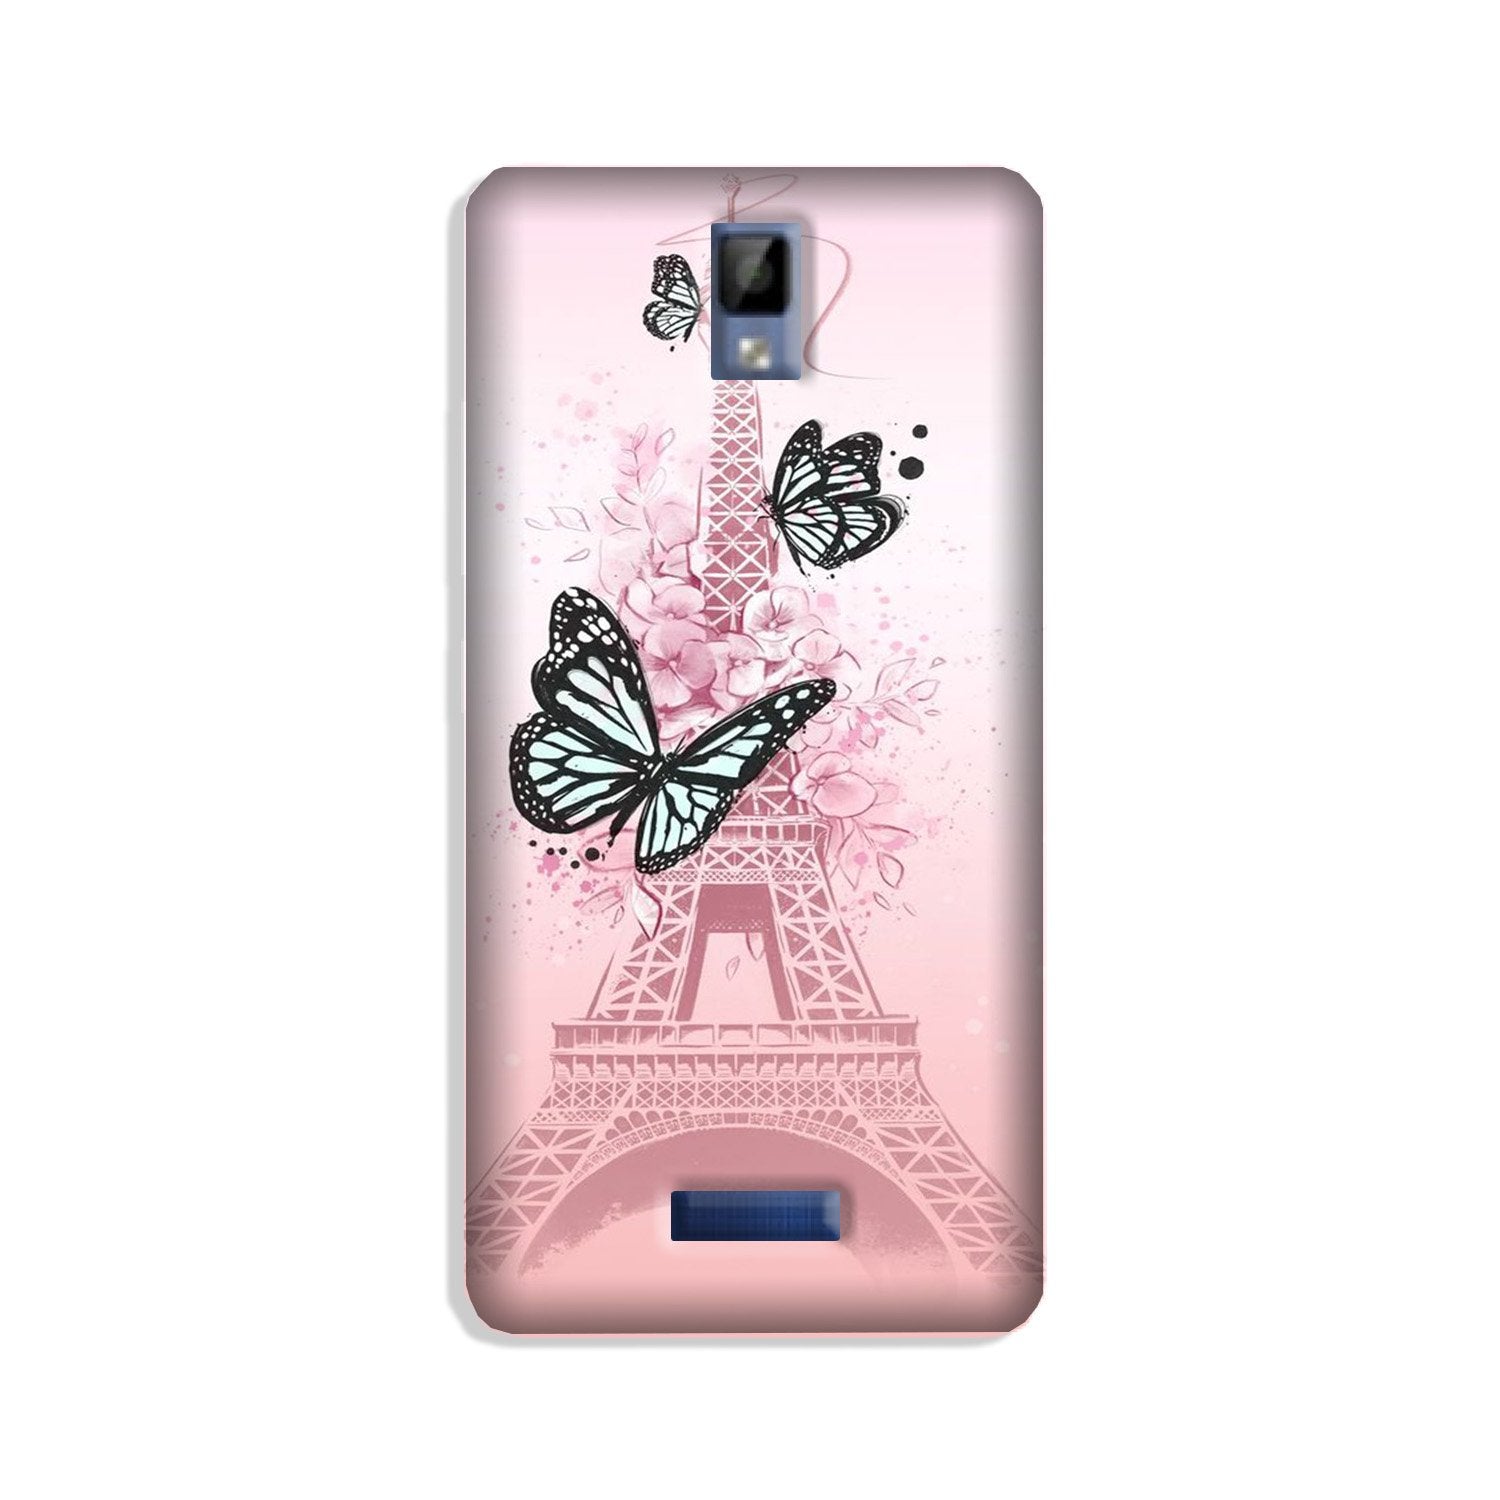 Eiffel Tower Case for Gionee P7 (Design No. 211)